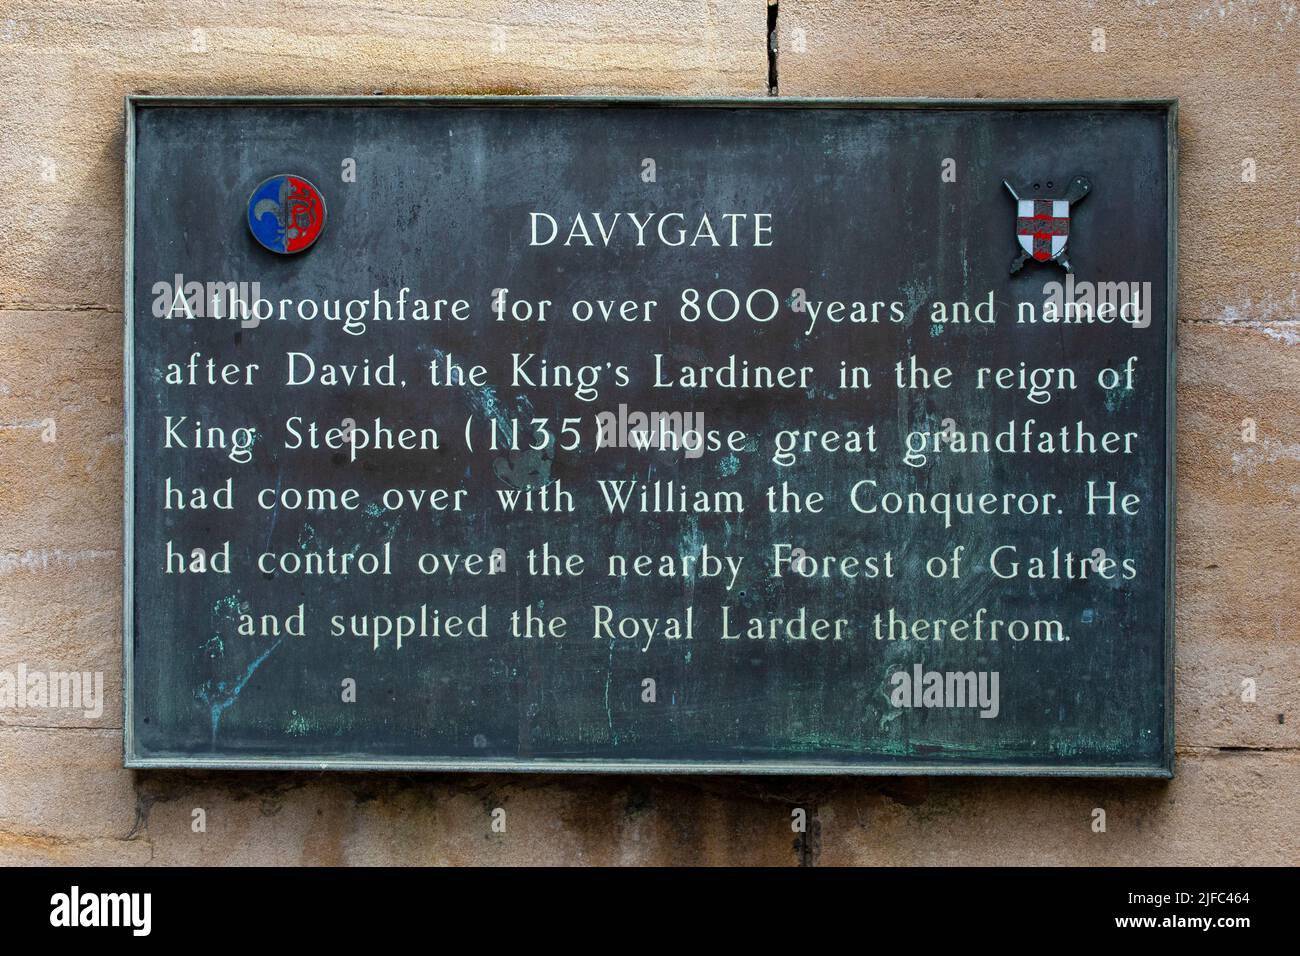 York, UK - June 6th 2022: An information plaque in the city of York, uk, detailing the history of Davygate - a thoroughfare in the city for over 800 y Stock Photo